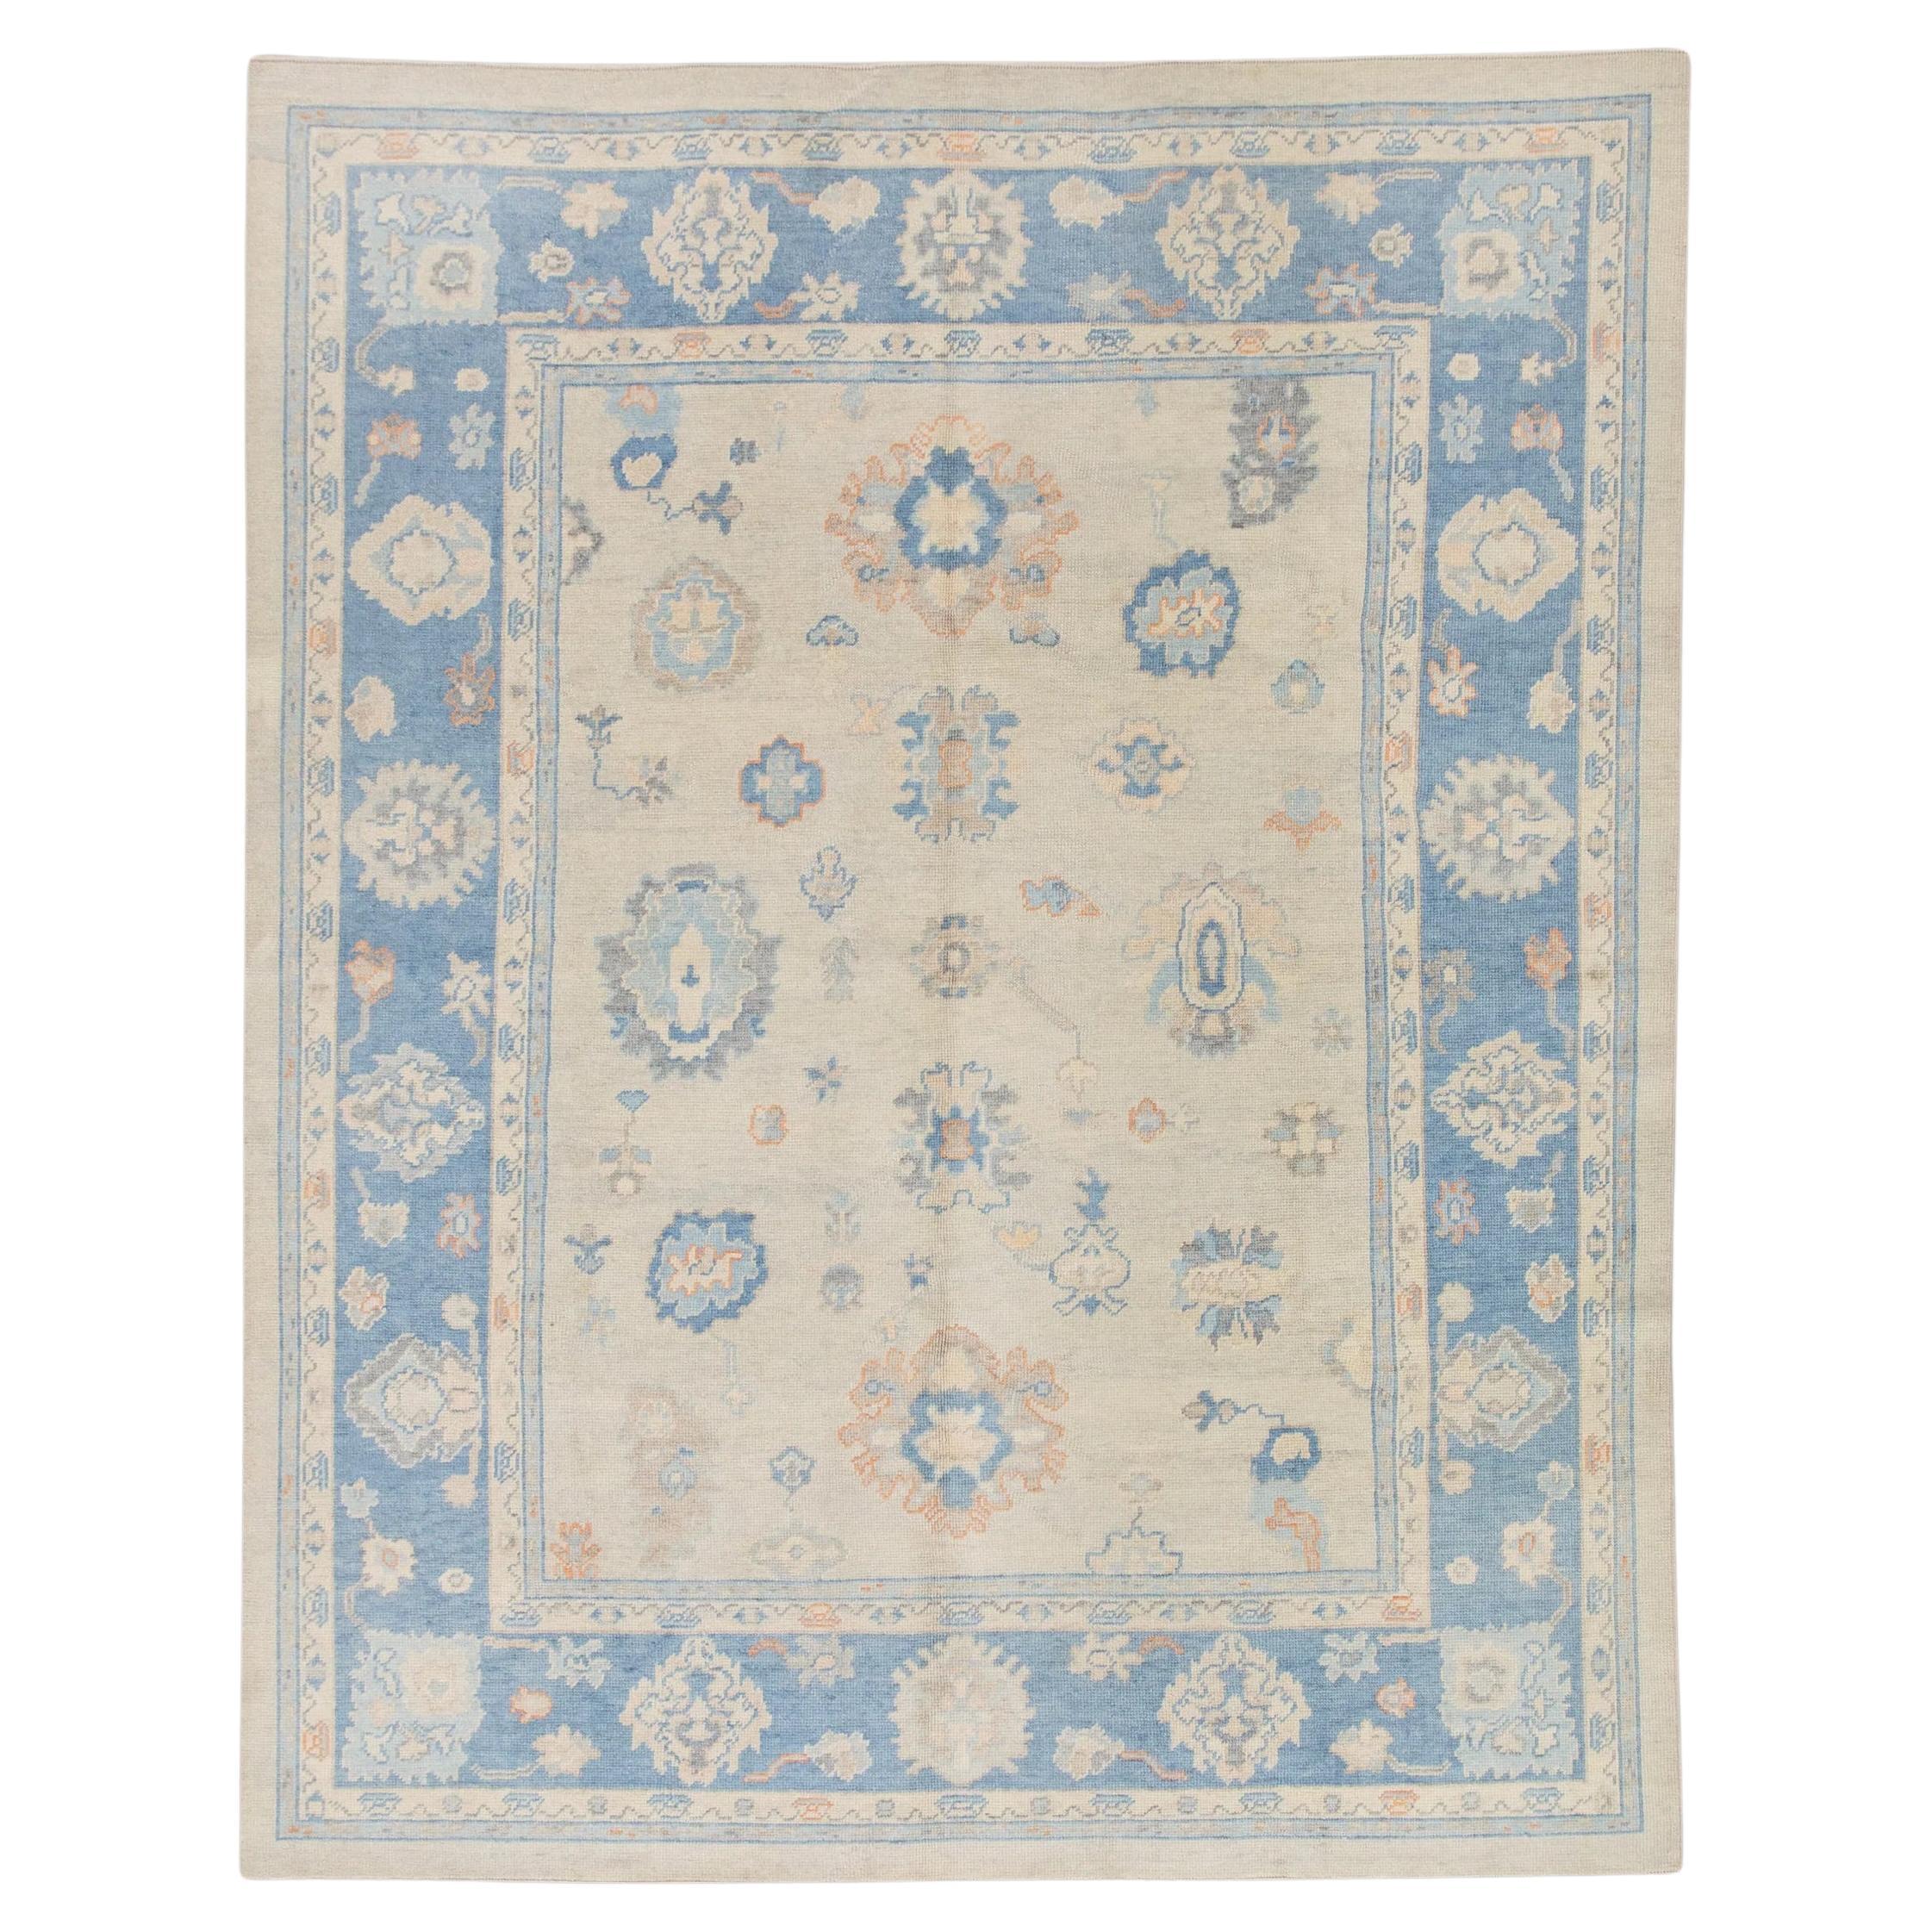 Blue Handwoven Wool Floral Turkish Oushak Rug 8'2" x 10' For Sale